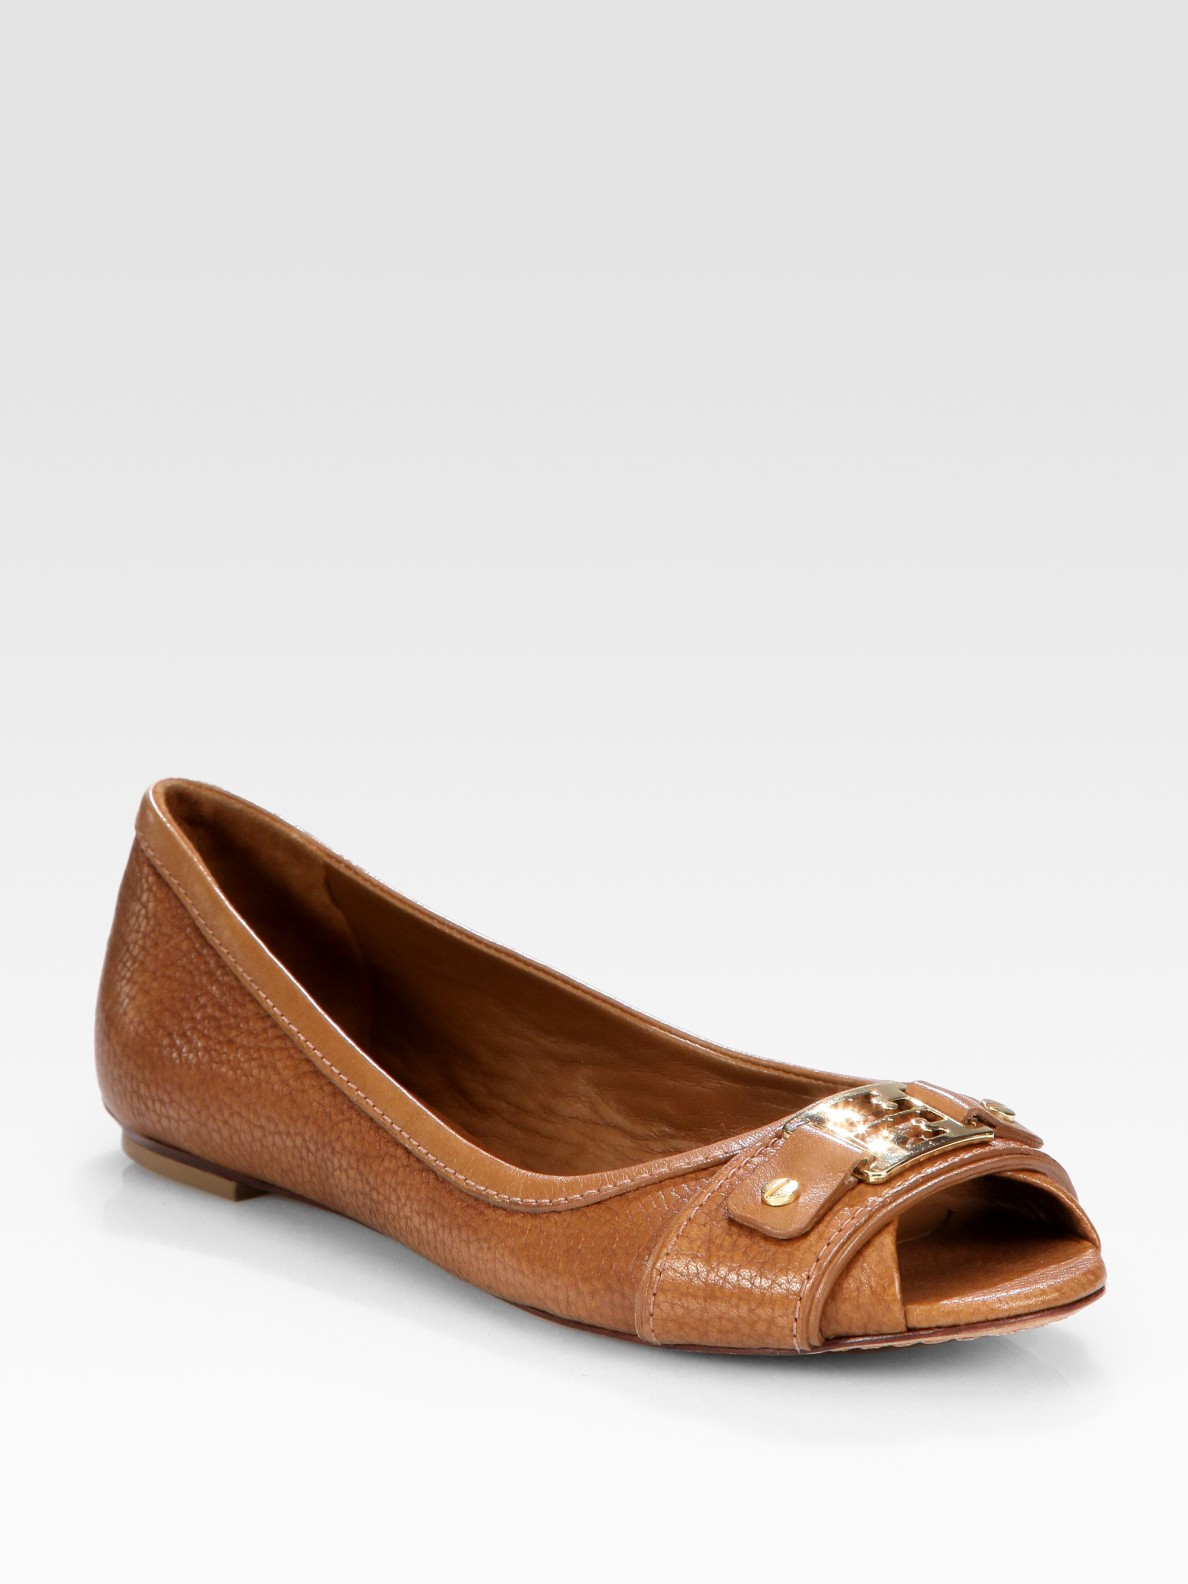 Tory Burch Cline Leather Peep Toe Logo Ballet Flats in Brown | Lyst